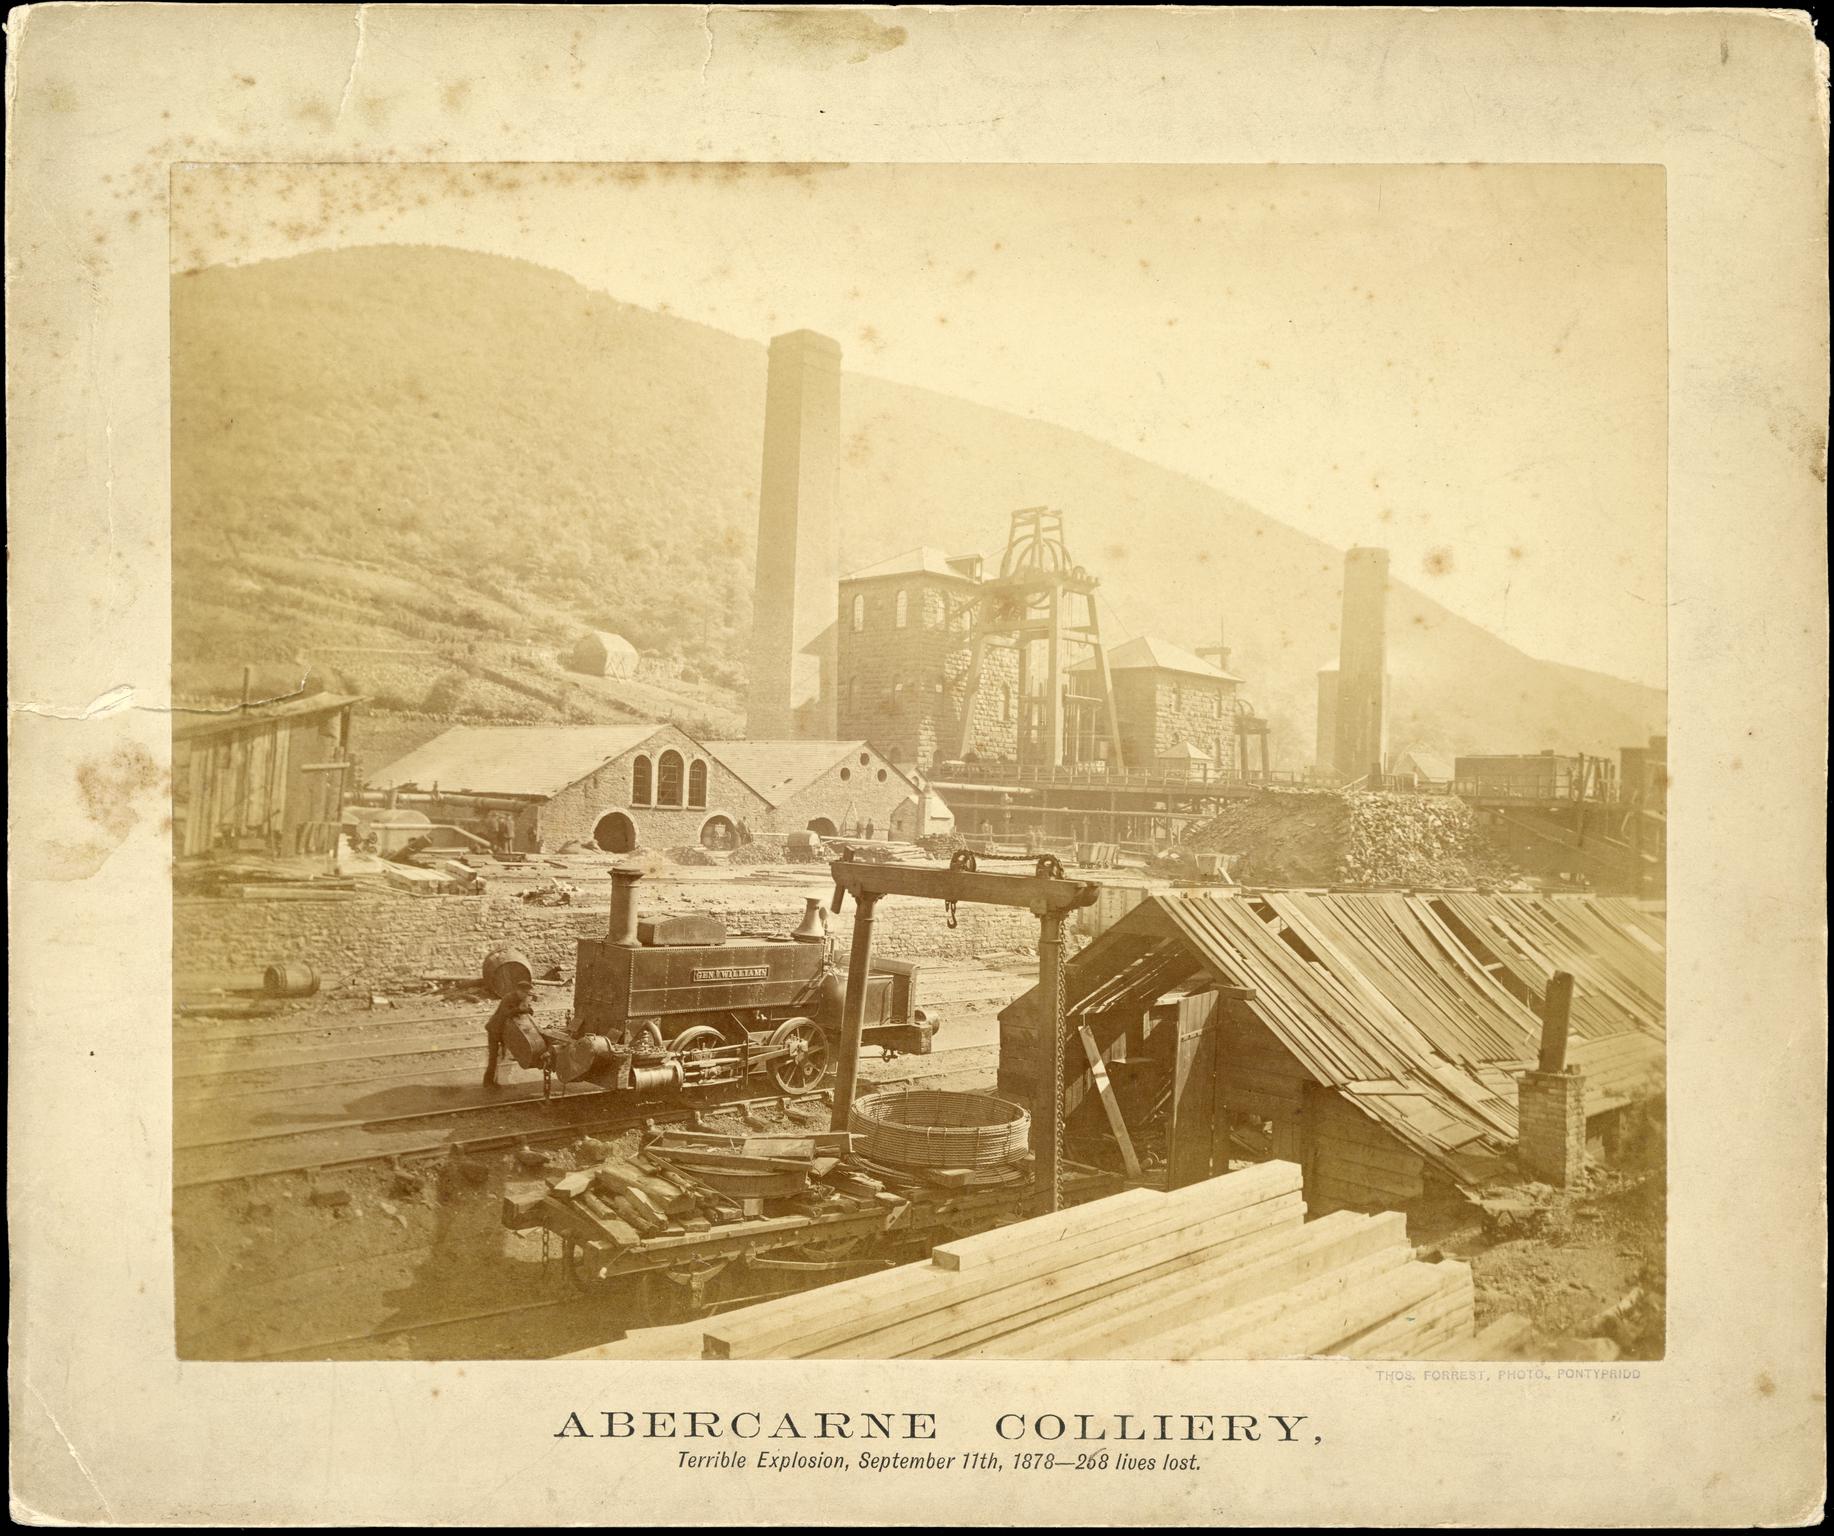 Abercarne Colliery (photograph)